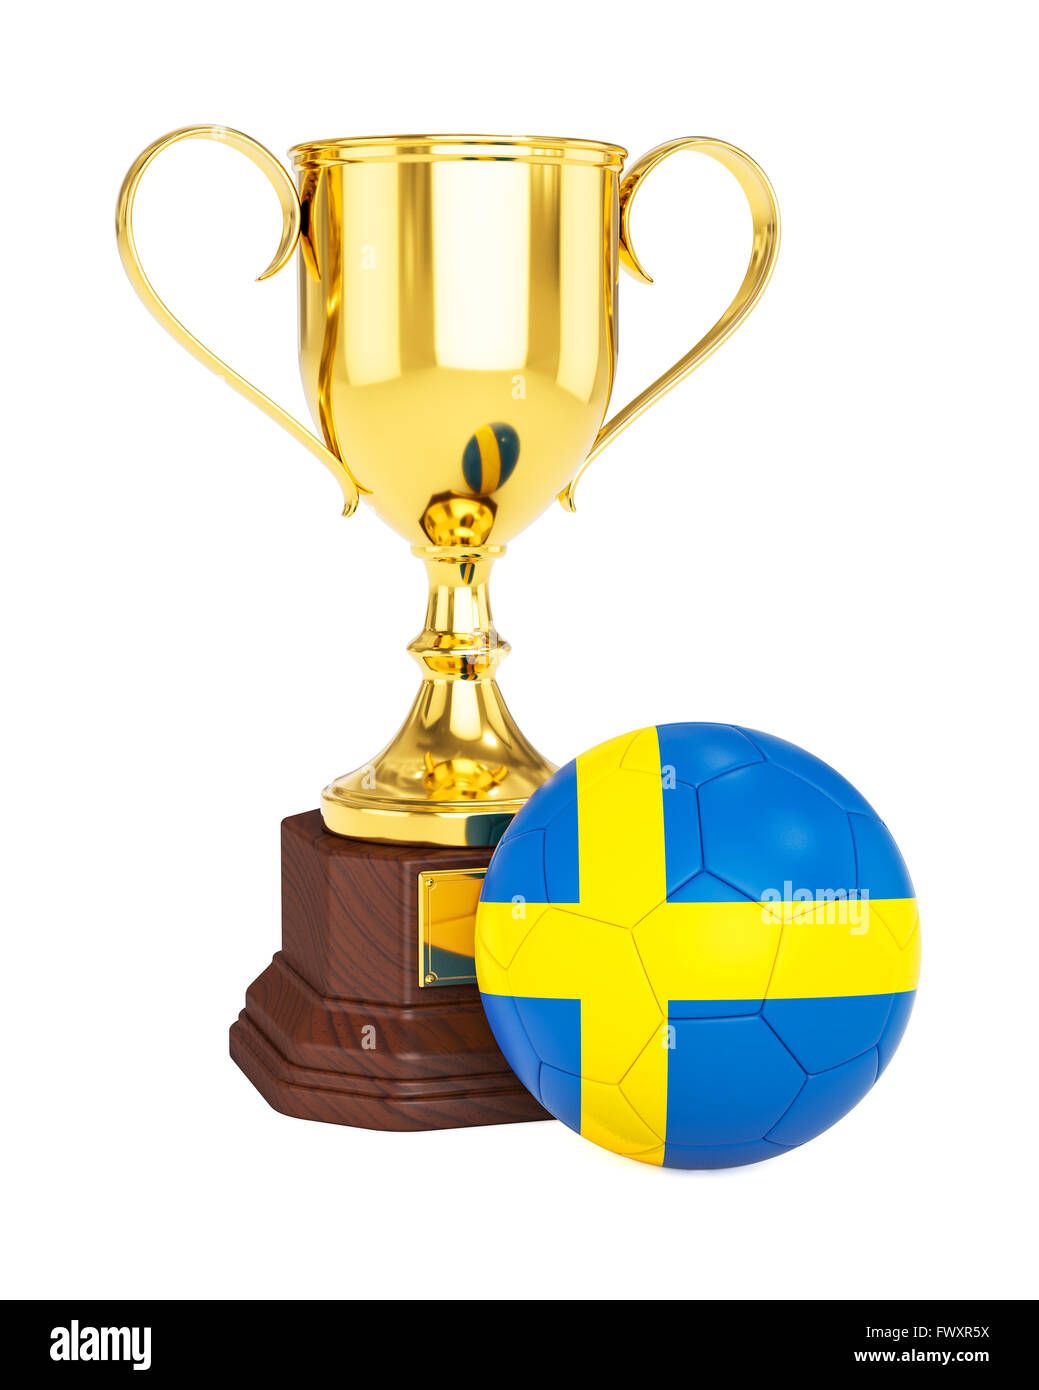 Gold trophy cup and soccer football ball with Sweden flag Stock Photo